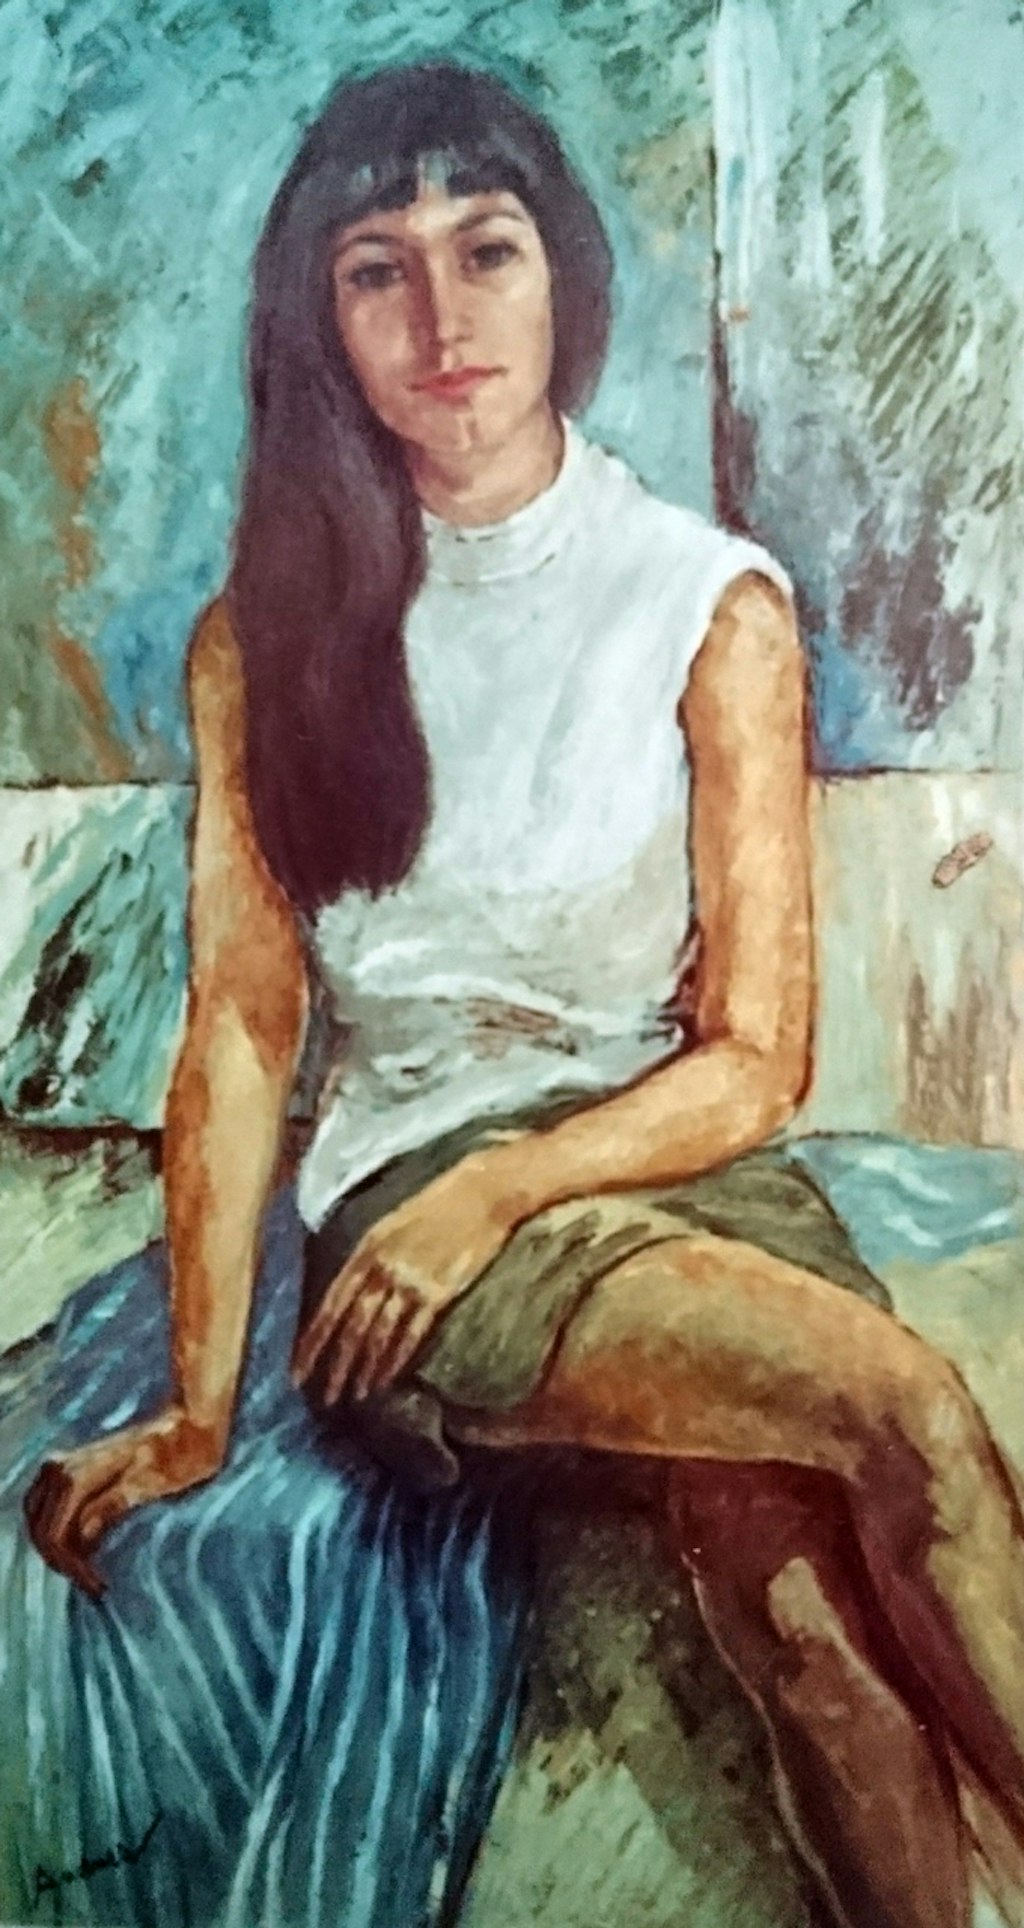 Seated woman with long dark hair hanging over her right shoulder and a short fringe. She is wearing a sleeveless high-necked white top and short khaki skirt. She sits with her right leg over her left on a piece of blue and white striped fabric draped over a seat, her right hand resting on her left thigh.